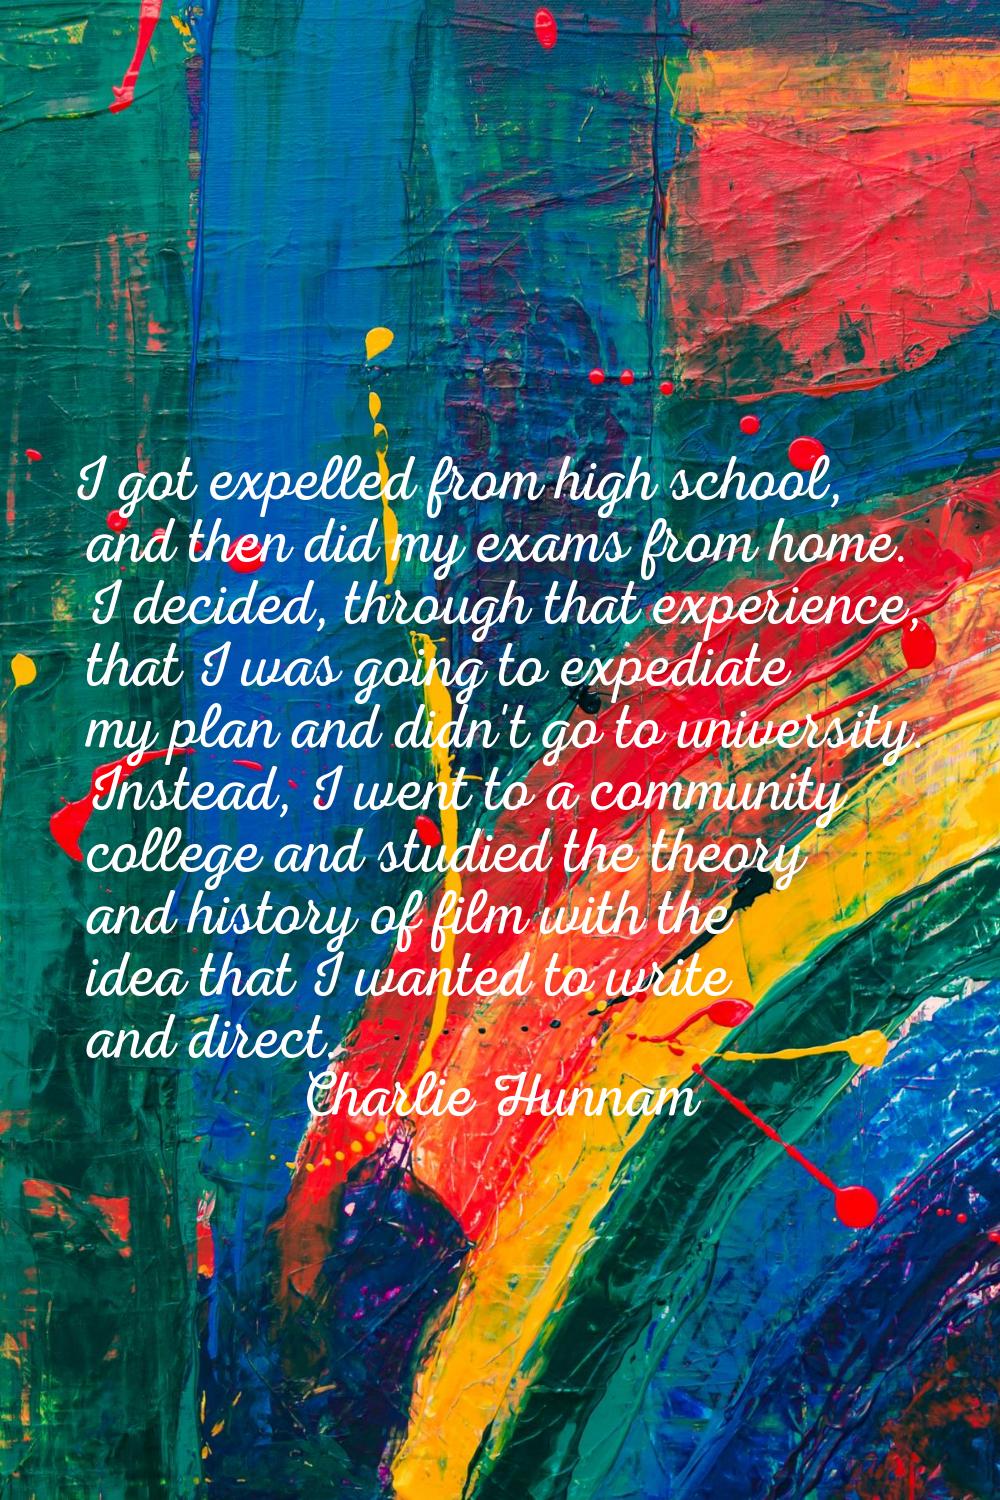 I got expelled from high school, and then did my exams from home. I decided, through that experienc